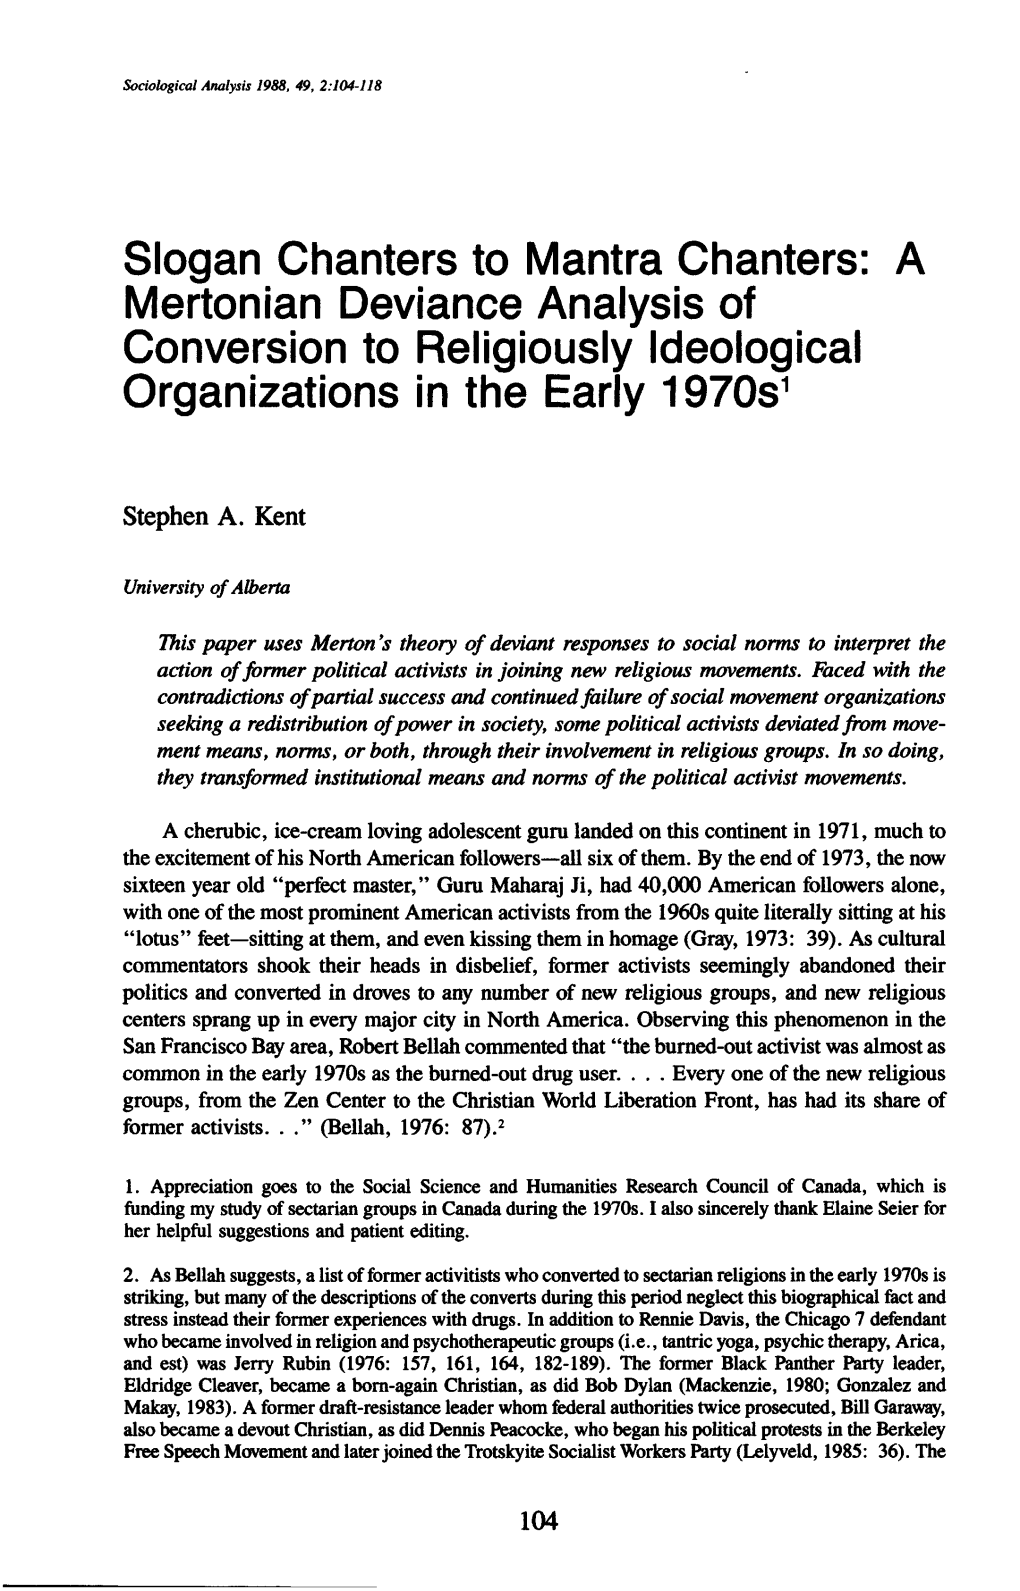 Slogan Chanters to Mantra Chanters: a Mertonian Deviance Analysis of Conversion to Religiously Ideological Organizations in the Early 1970S1